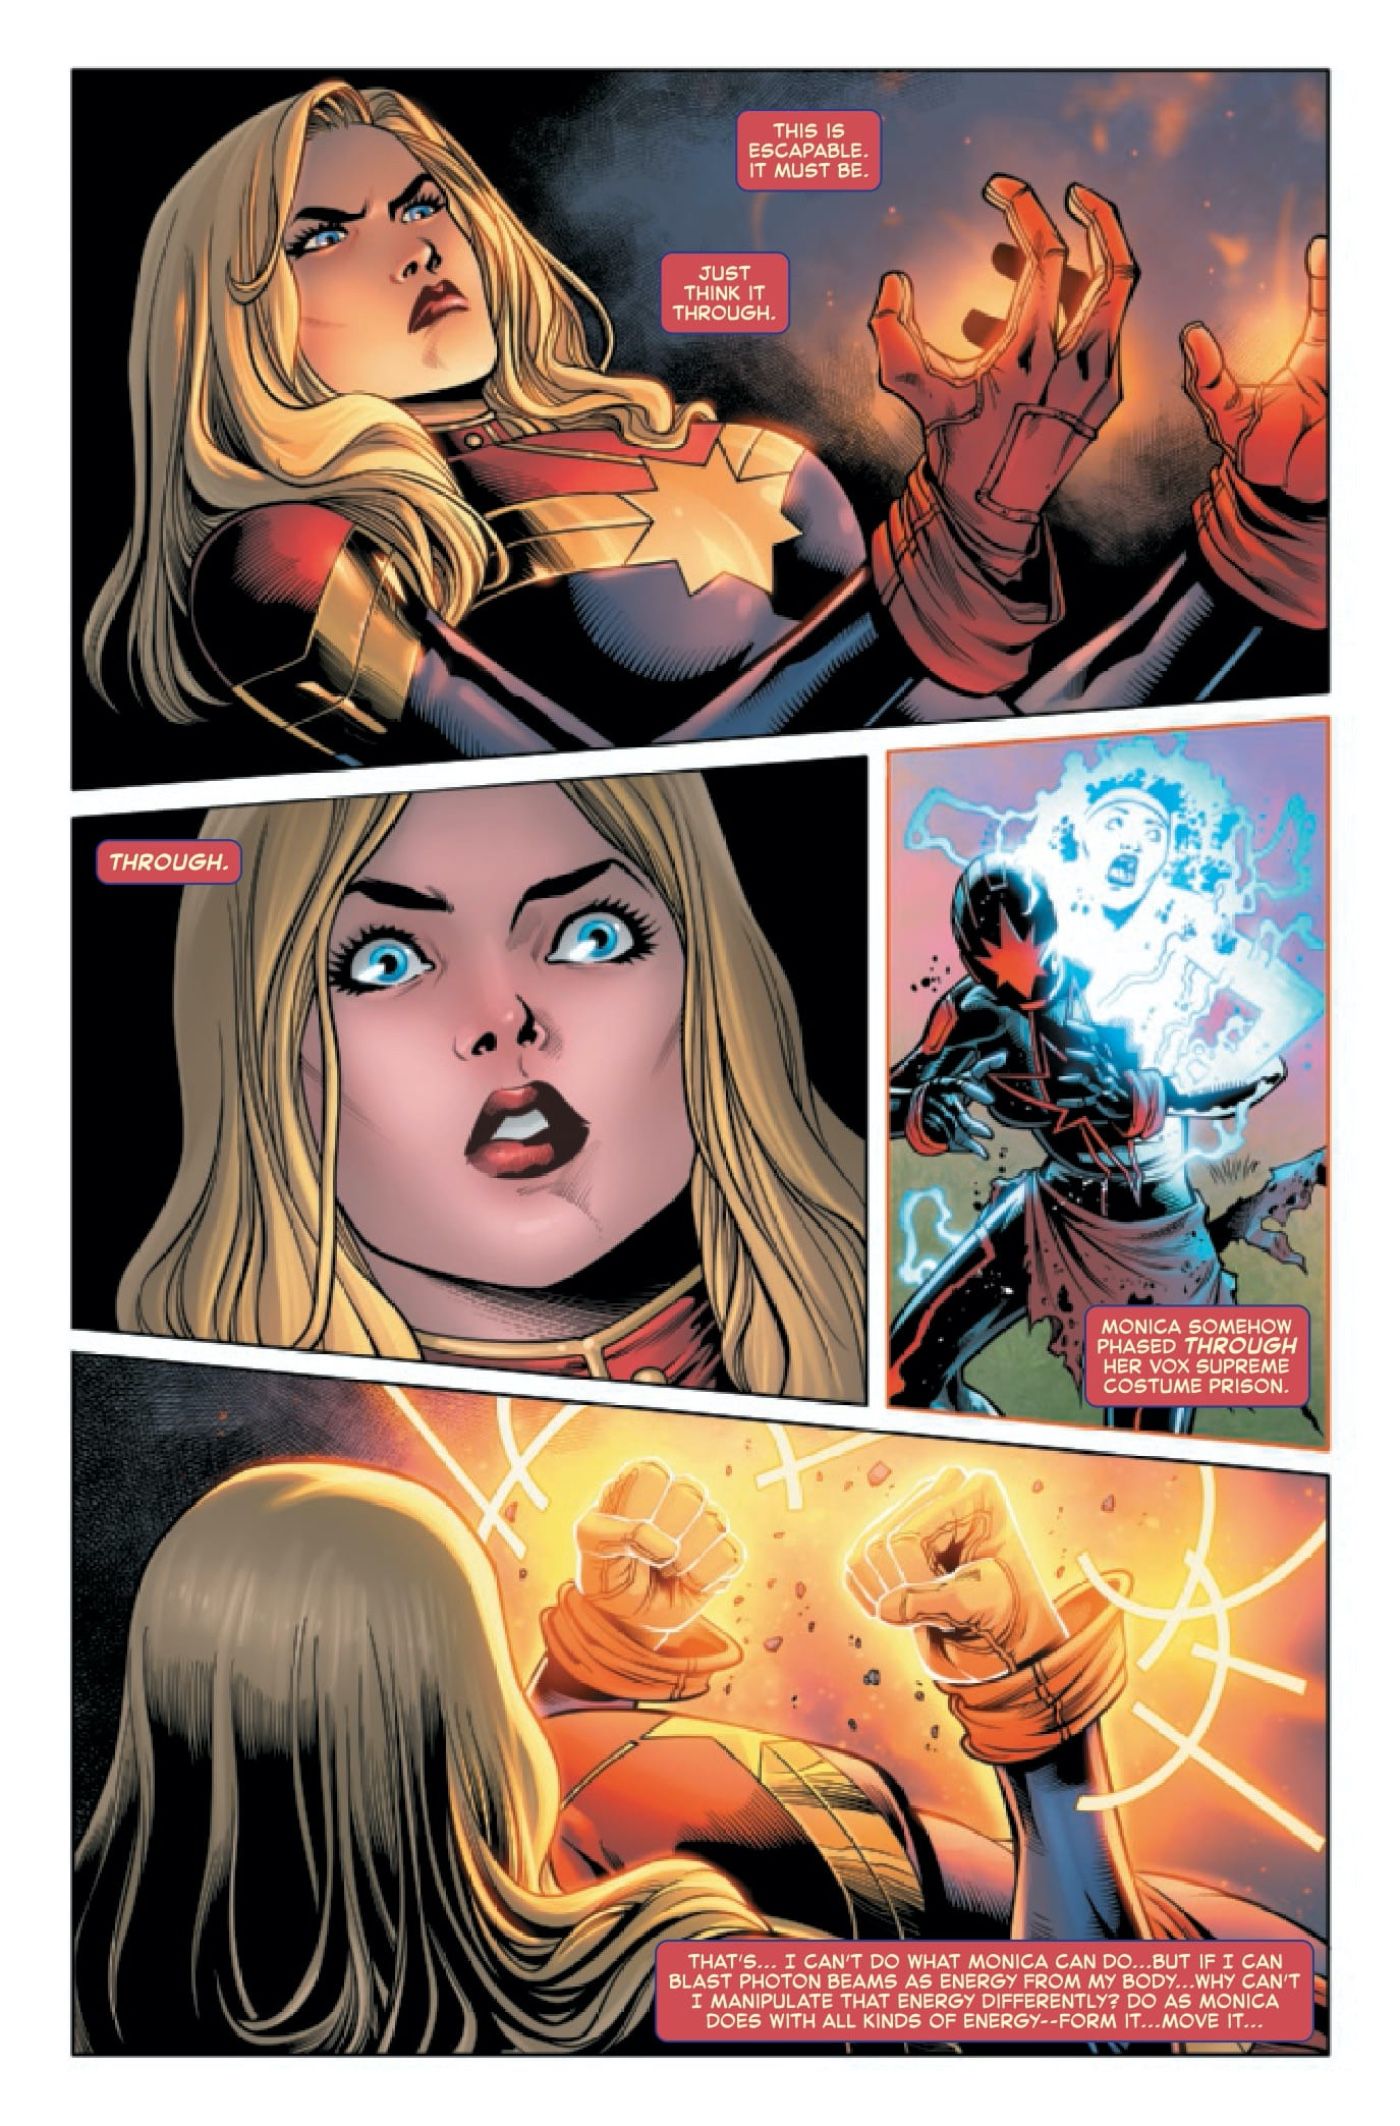 Captain Marvel 34 preview page, showing Carol Danvers trying to escape her prison